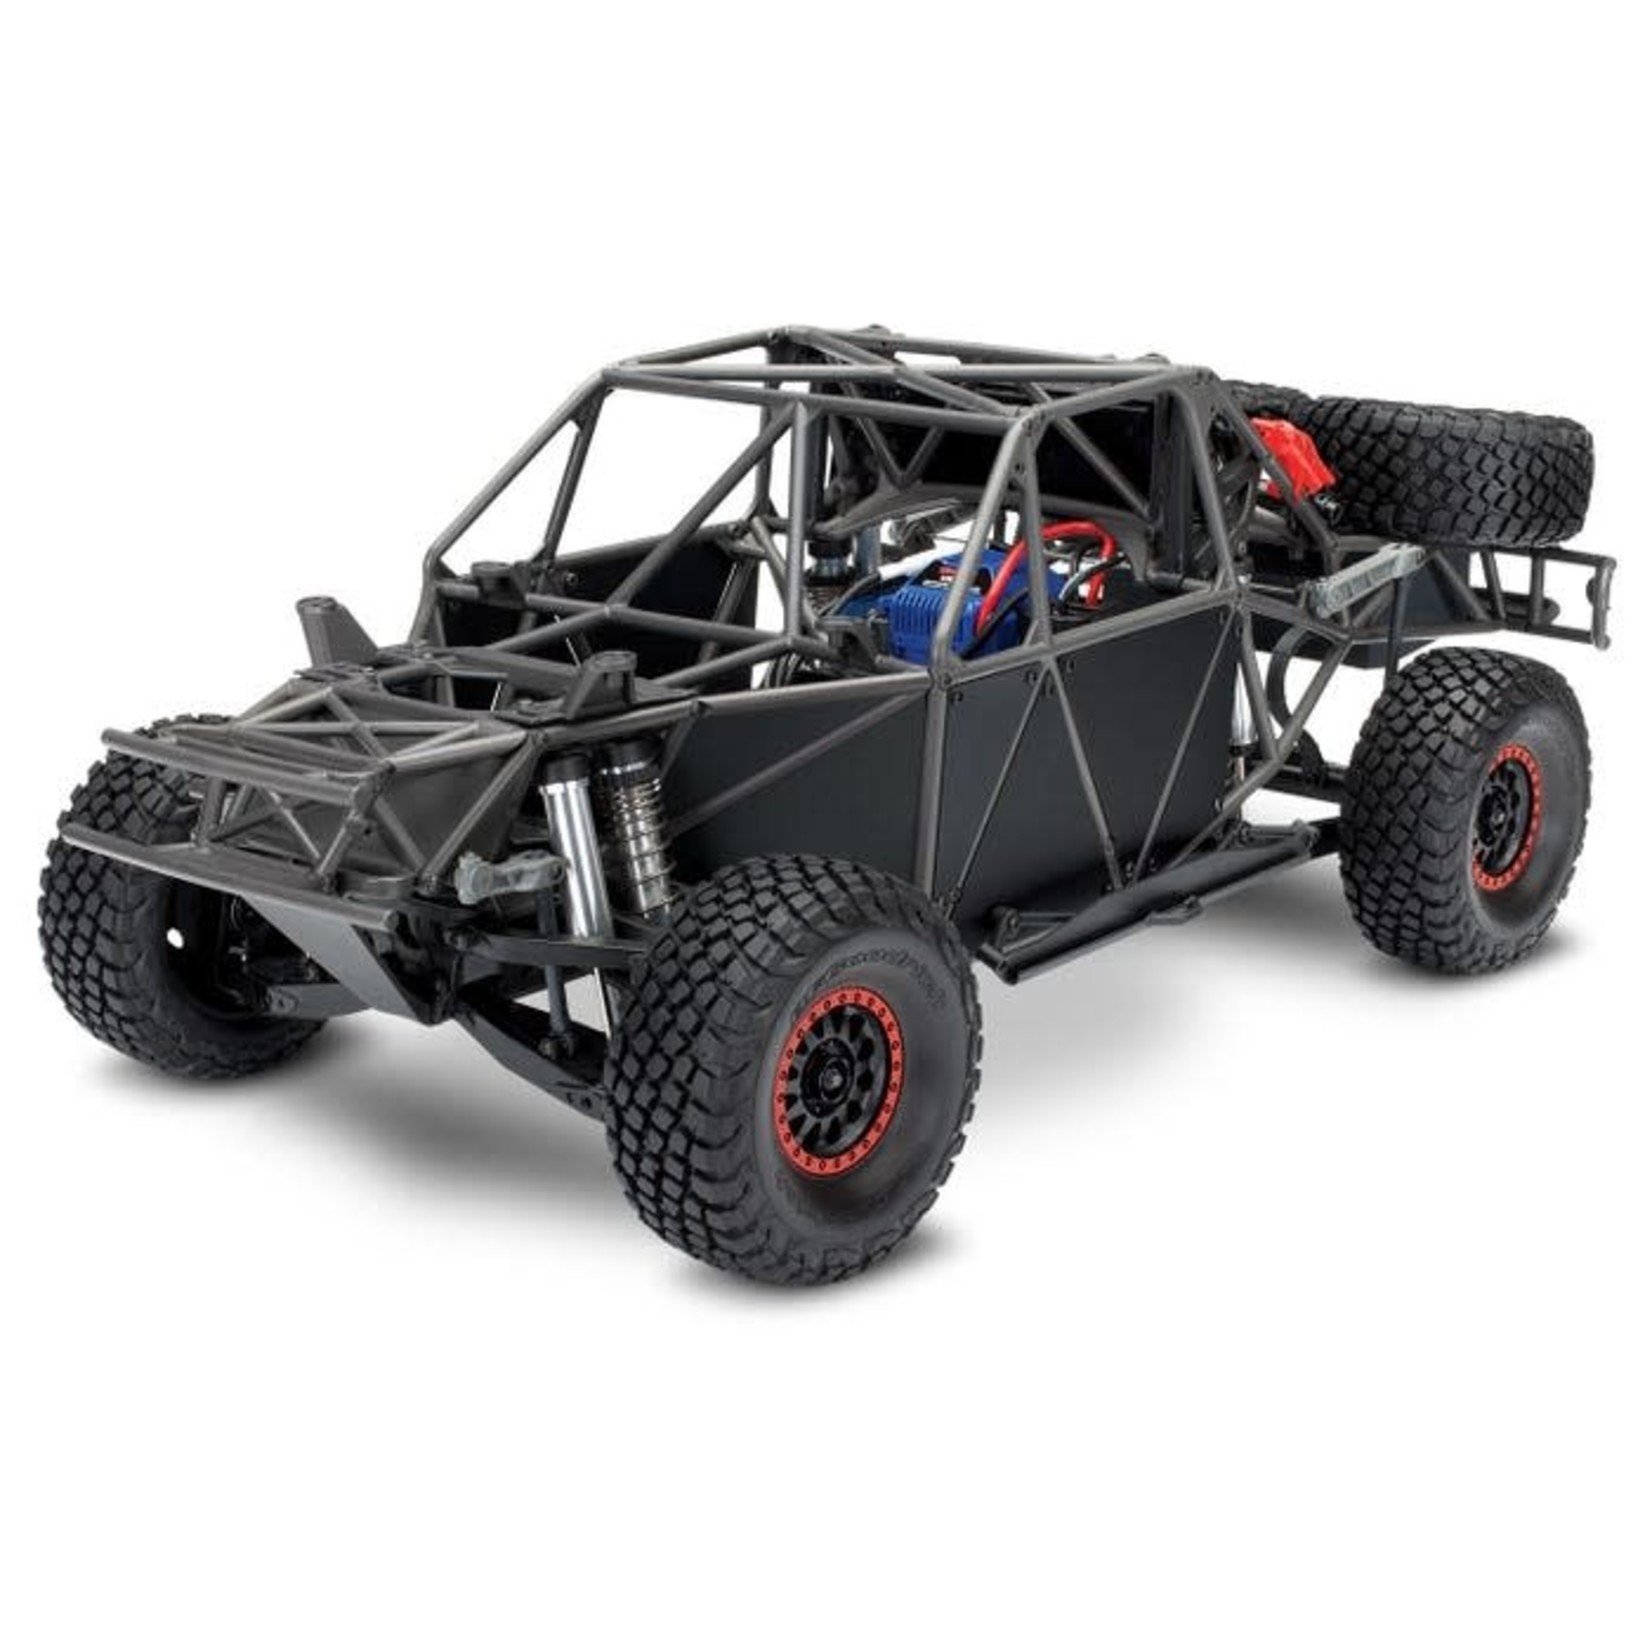 TRAXXAS Unlimited Desert Racer®:  4WD Electric Race Truck with TQi Traxxas Link™ Enabled 2.4GHz Radio System and Traxxas Stability Management (TSM)®